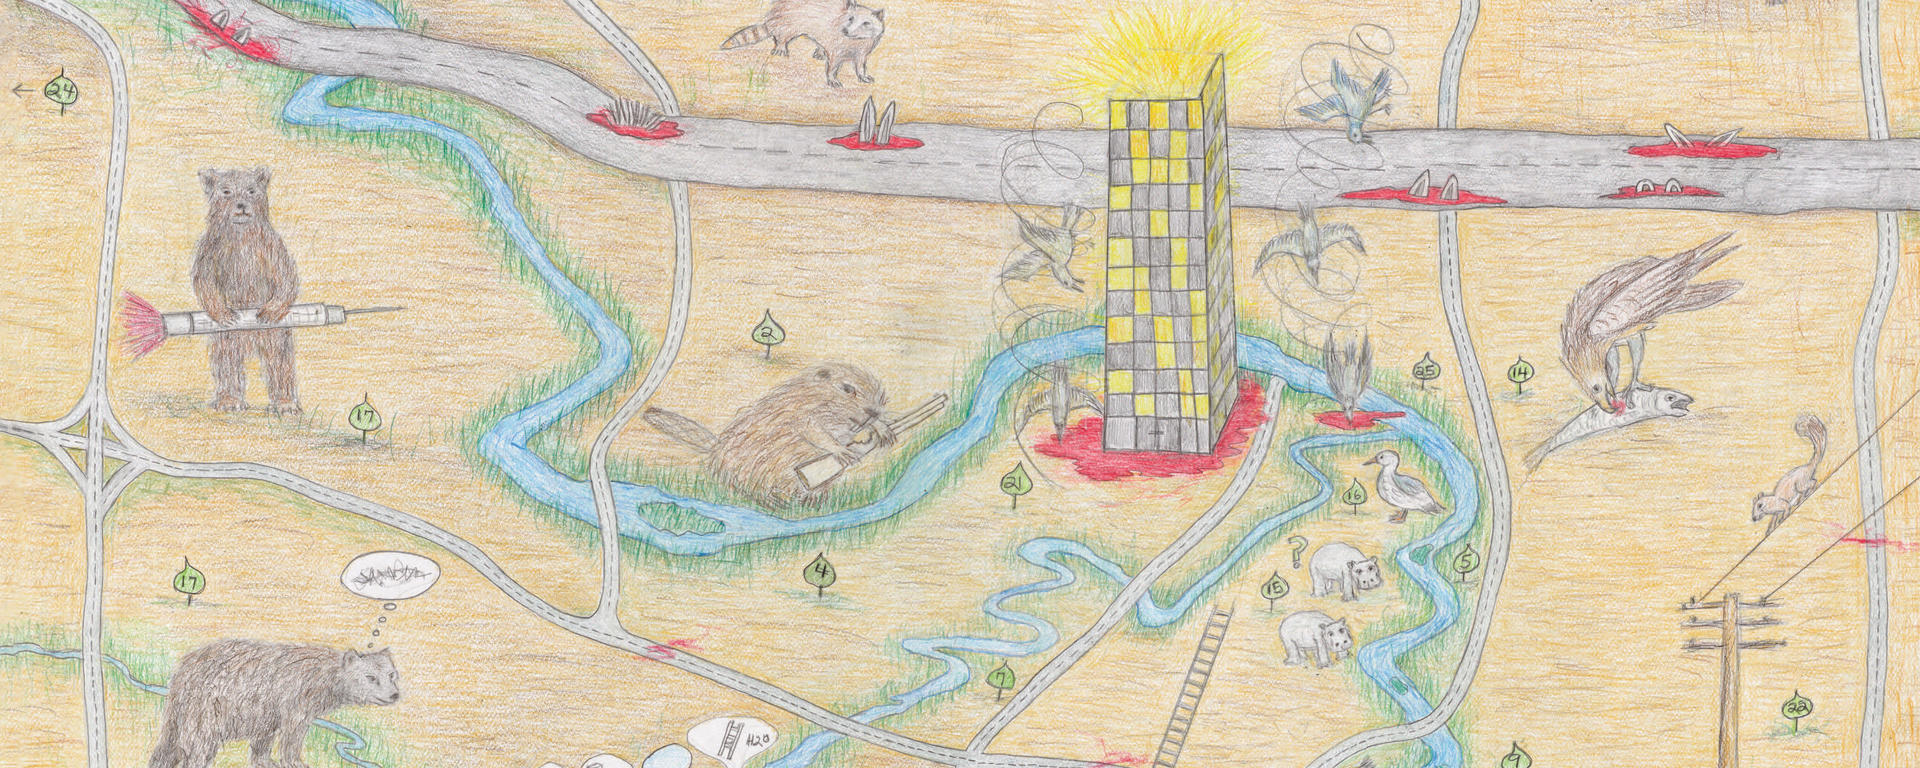 The Animals Guide to Calgary map detail - color pencil drawing of bears, beaver, hippos and fish along Elbow River